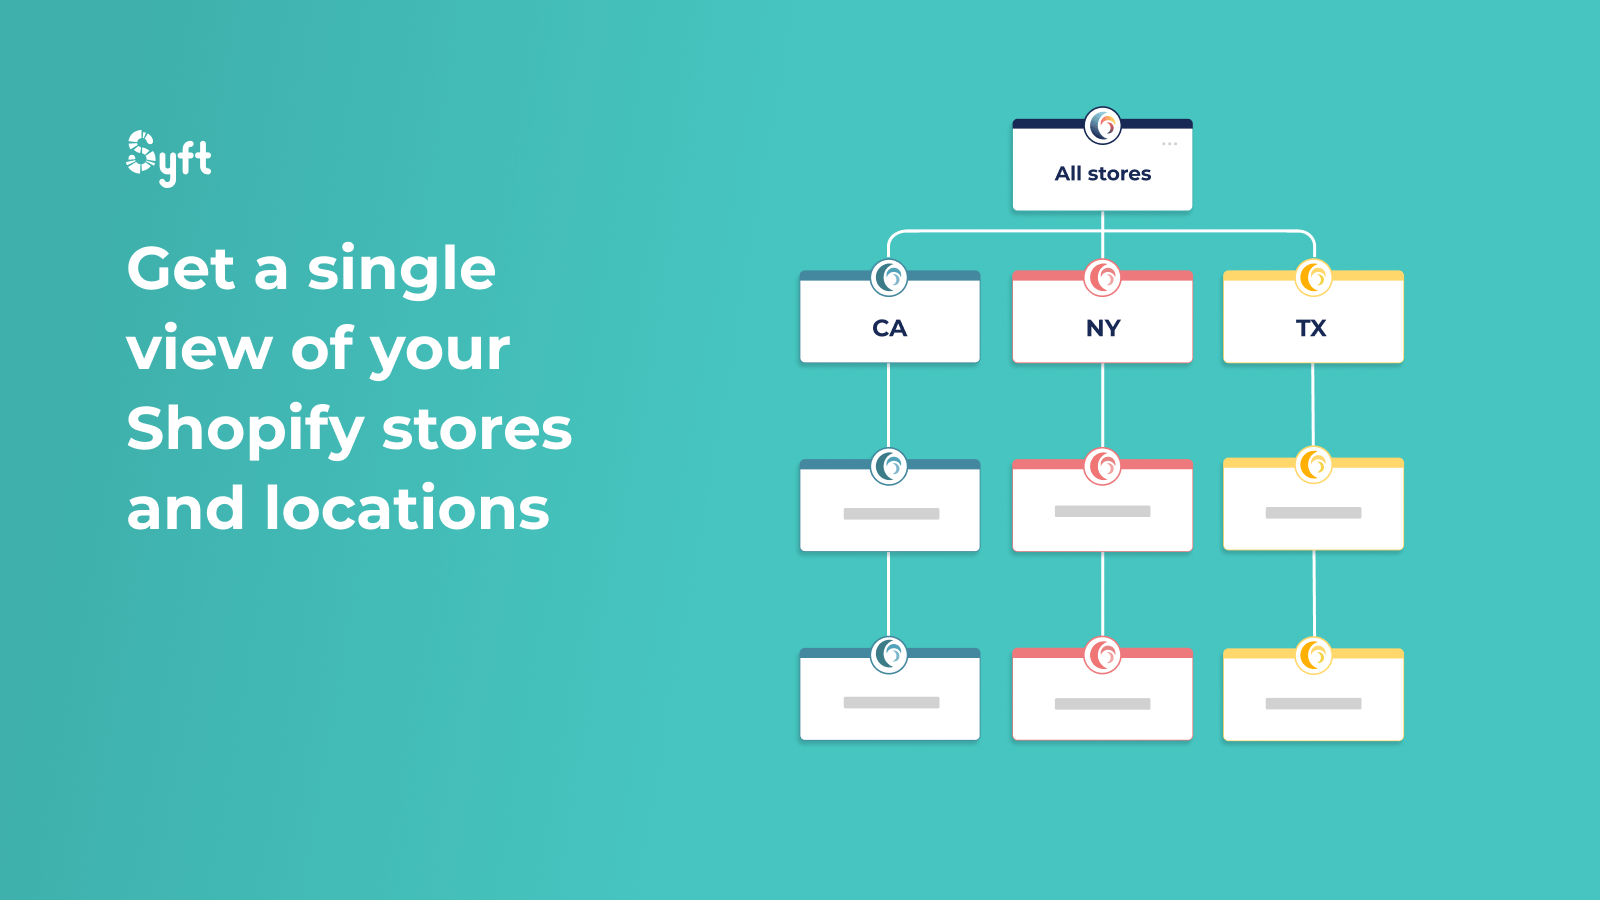 Get a single view of all your stores